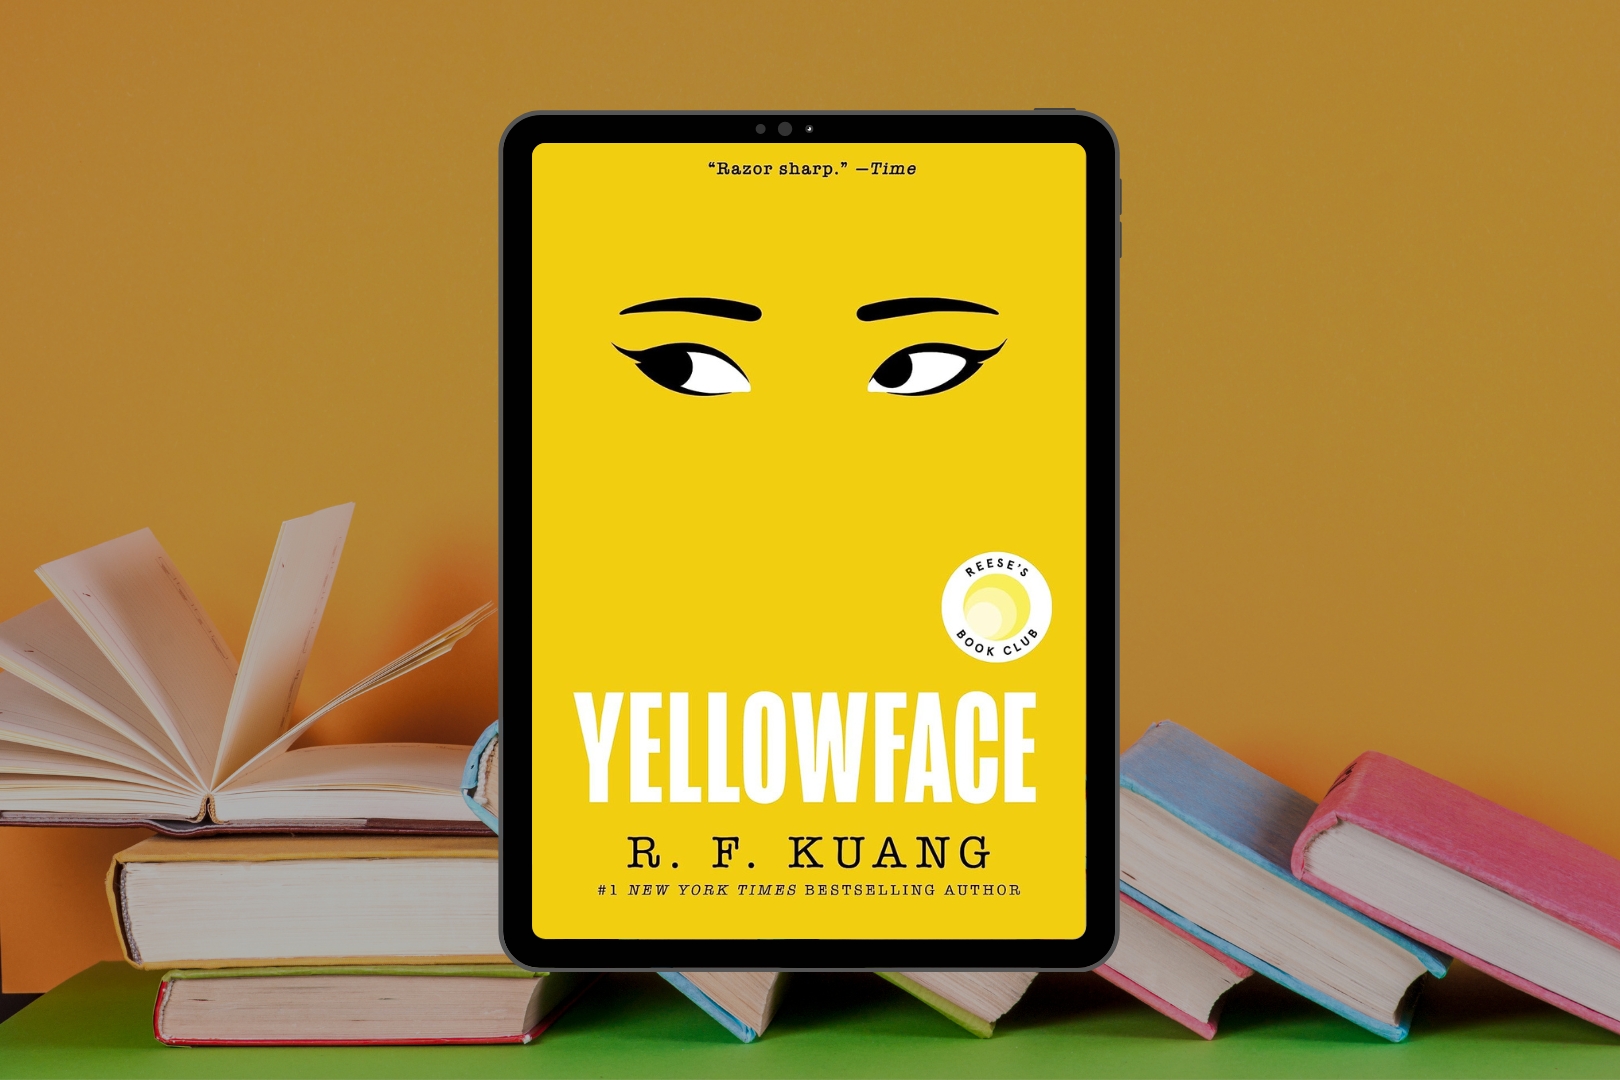 Book Club Questions for Yellowface by R.F. Kuang